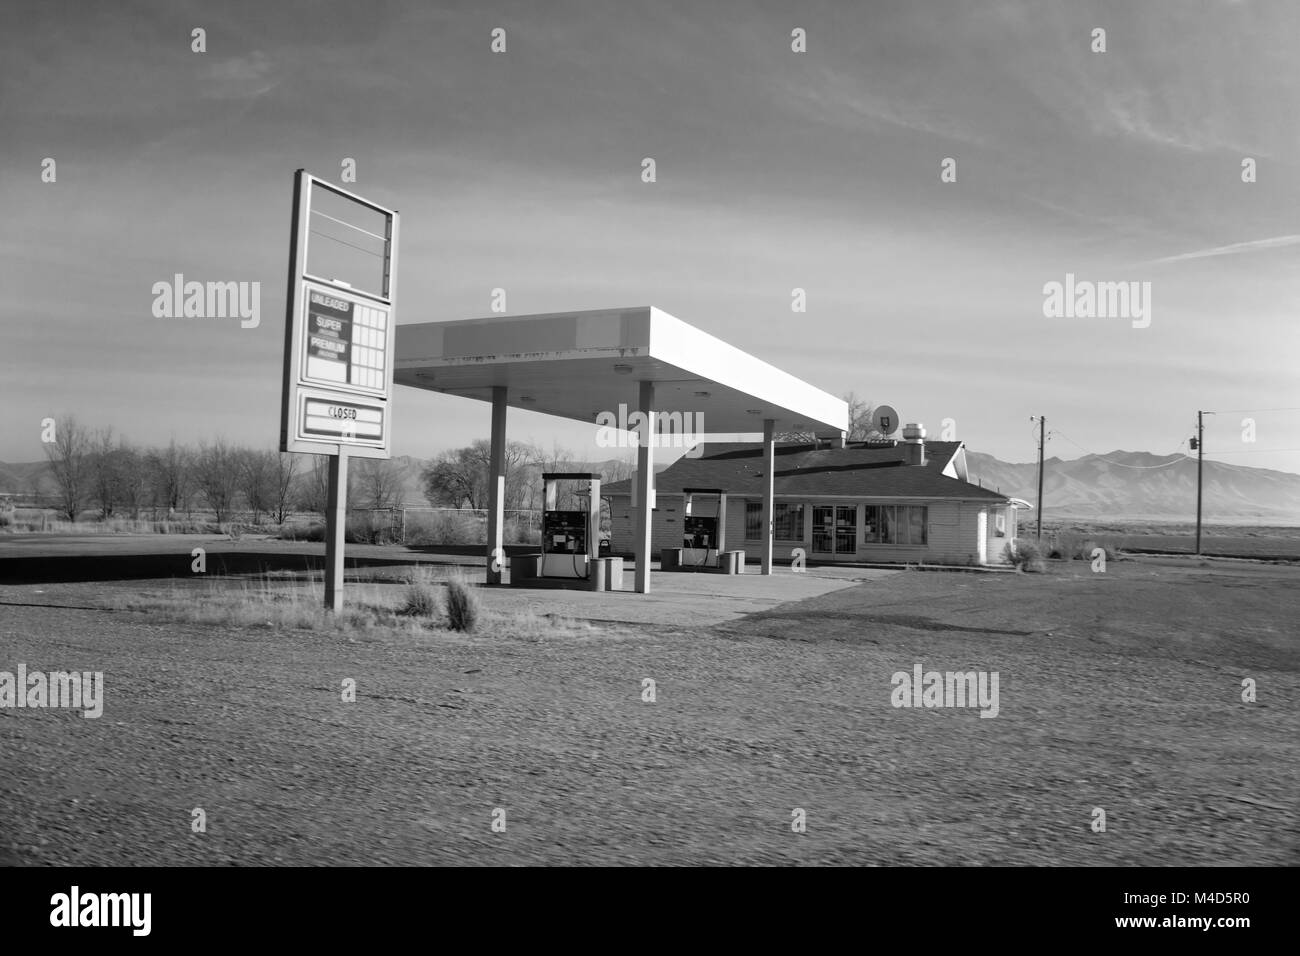 A closed, dilapidated gas station in the Utah desert in black and white. Stock Photo